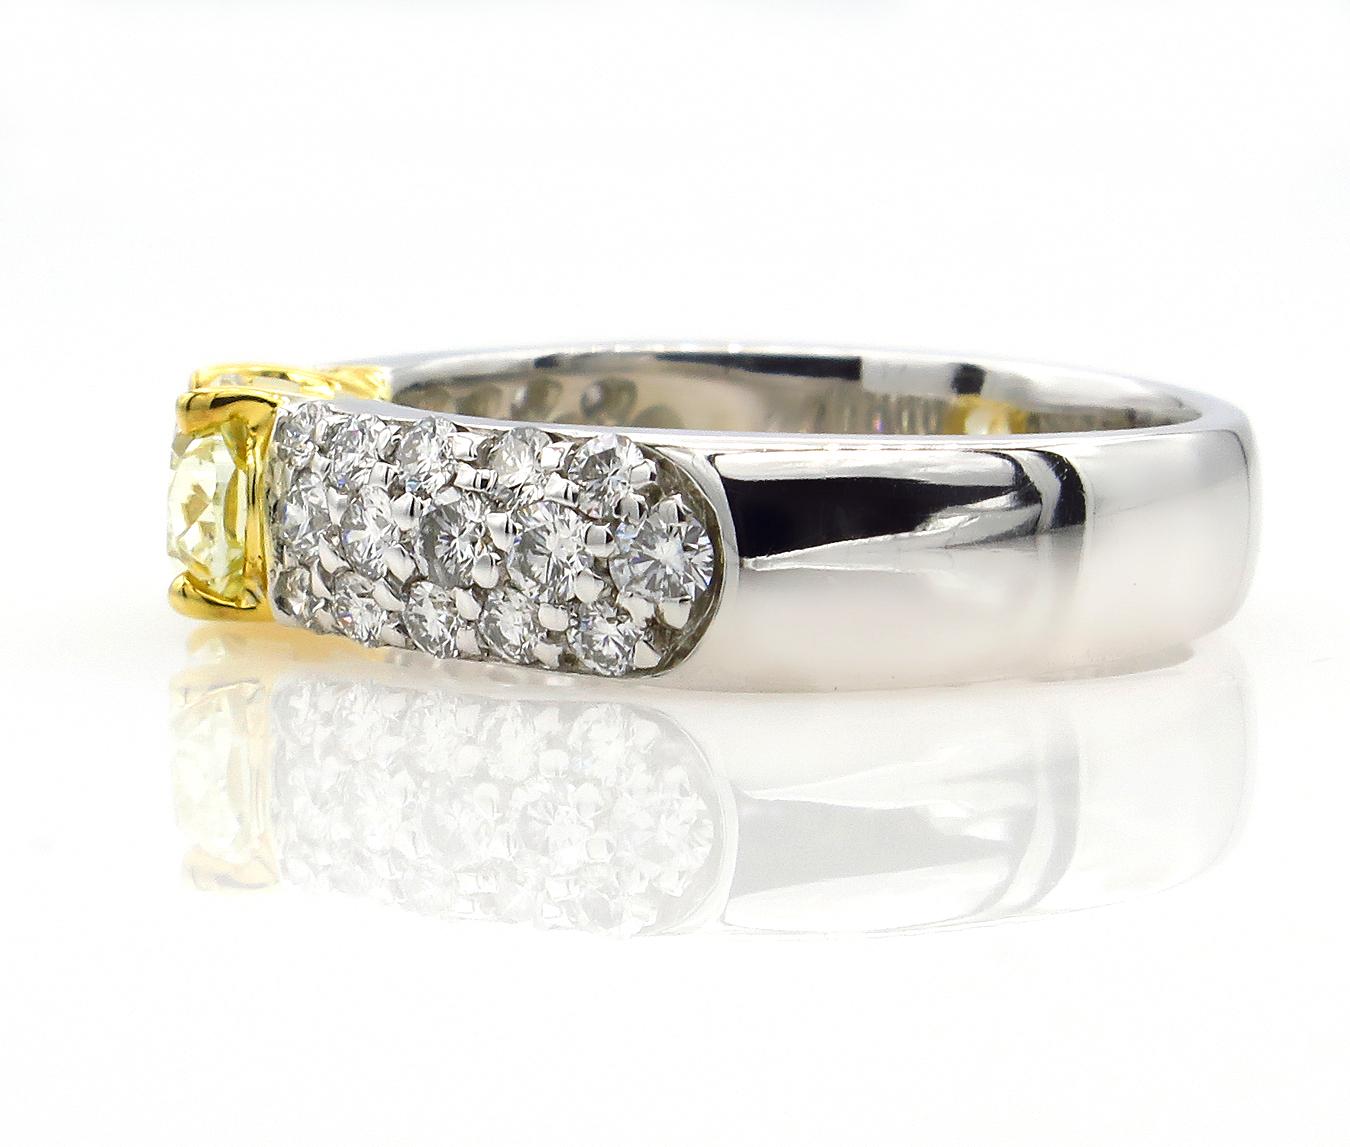 GIA 1.62 Carat Natural Fancy Yellow Oval Diamond Engagement Ring Pave Platinum 1